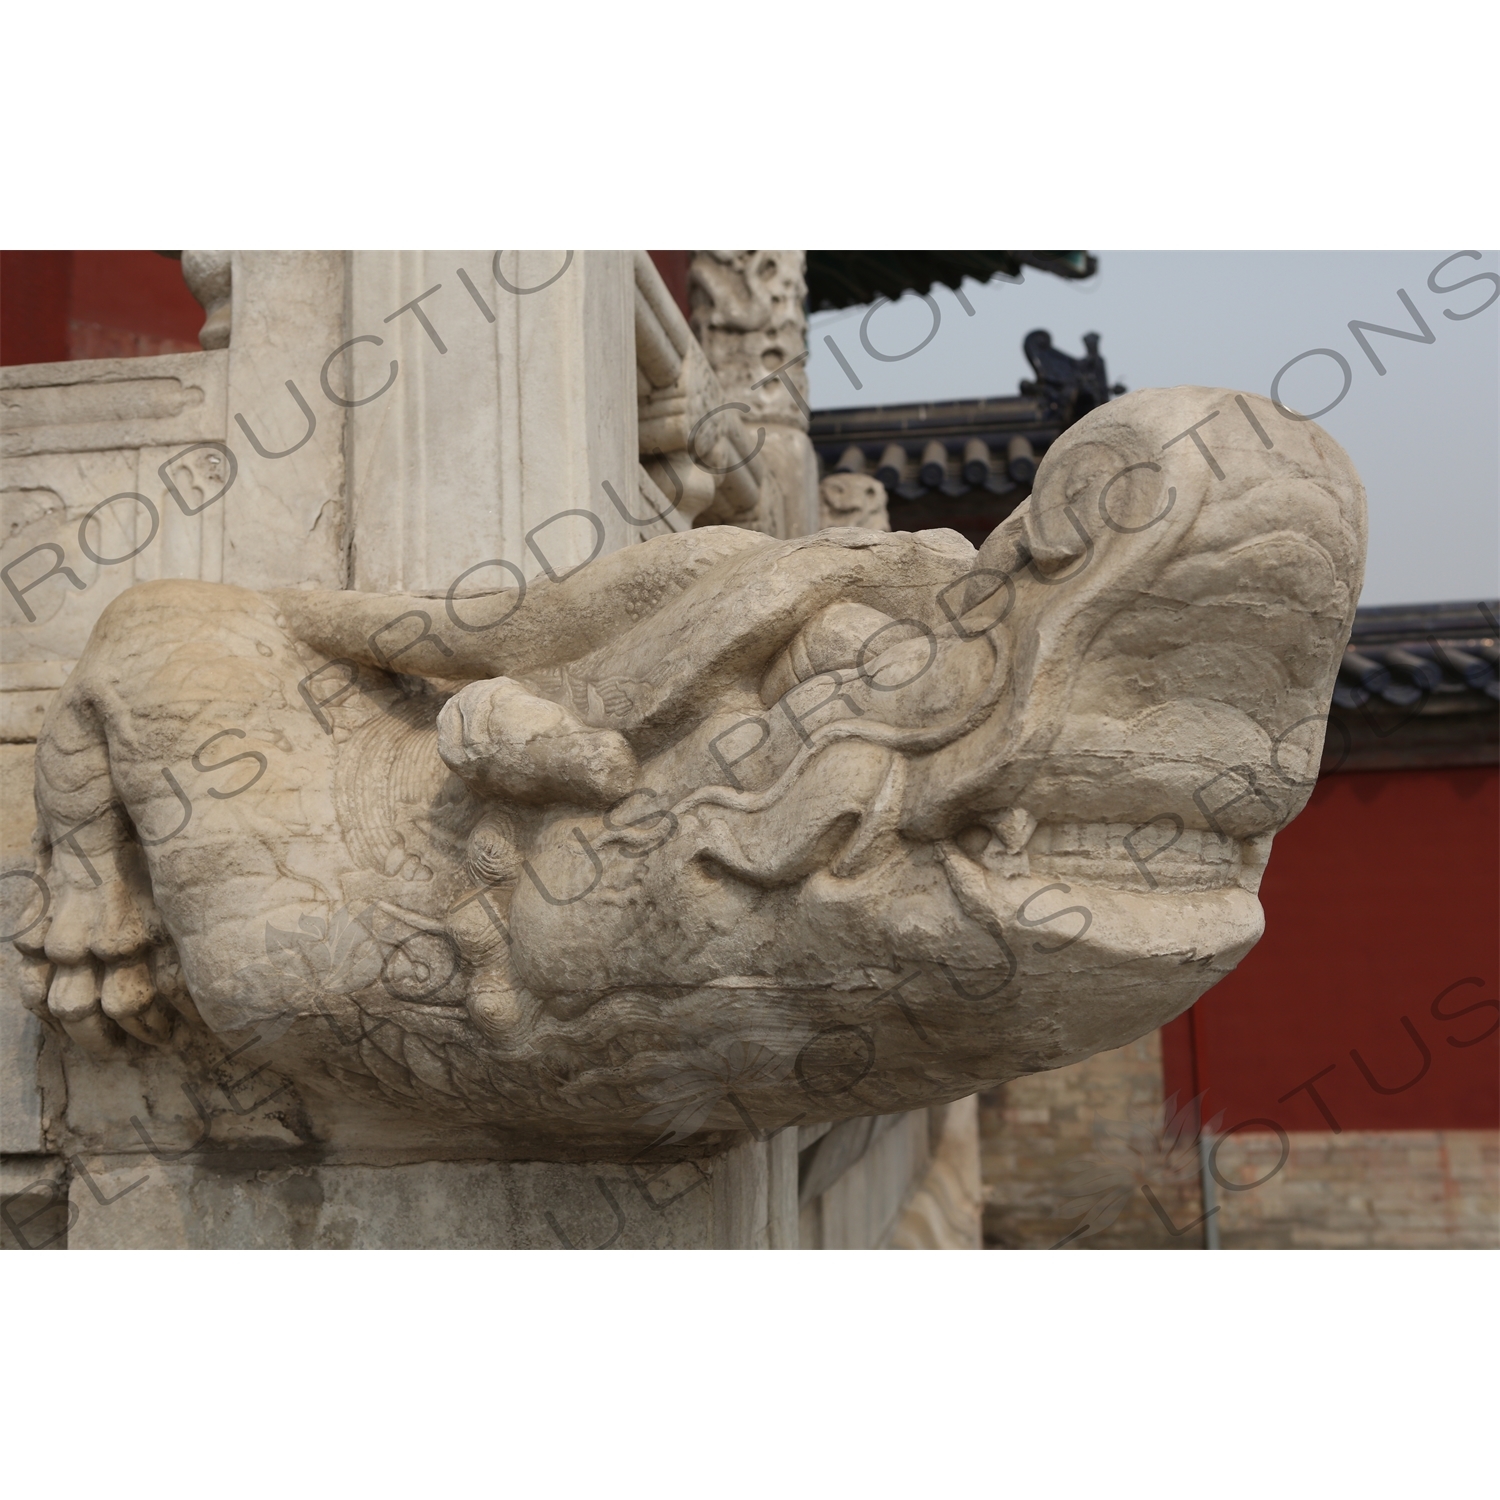 Dragon Head Water Spout in the Hall of Prayer for Good Harvests (Qi Nian Dian) Complex in the Temple of Heaven (Tiantan) in Beijing